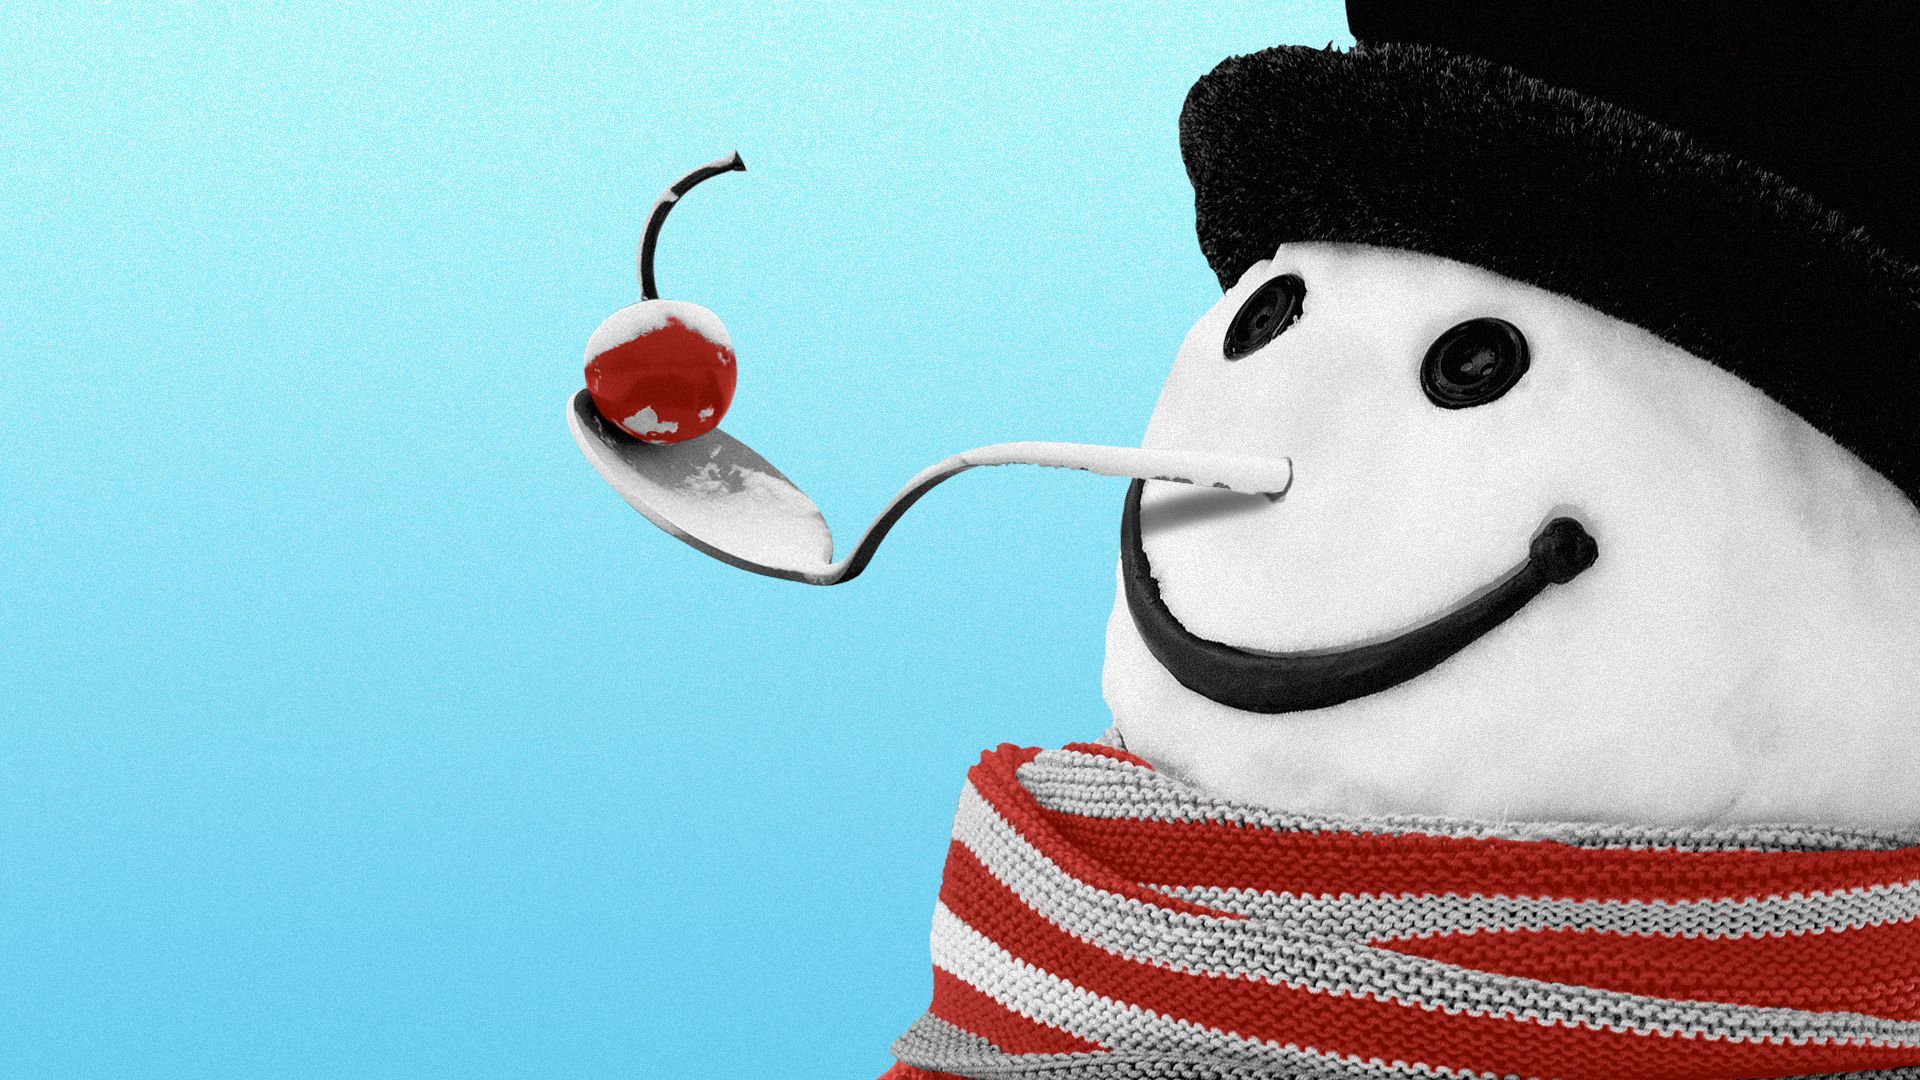 Illustration of a snowman with a spoon and cherry as the nose.